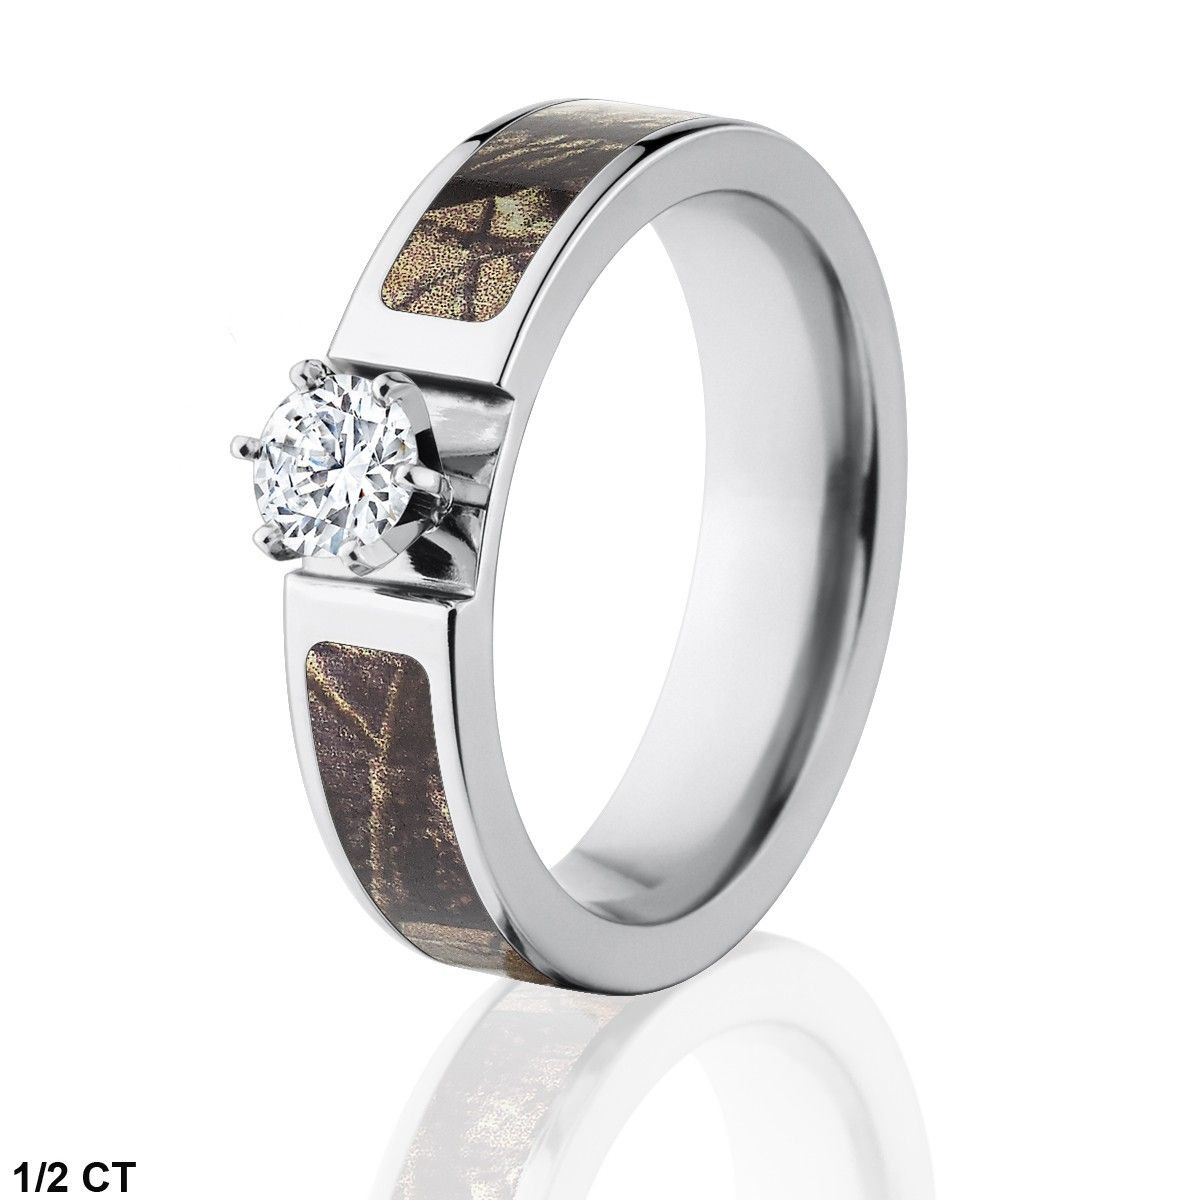 Camo Diamond Engagement Rings For Her
 Camouflage Engagement Rings Diamond Camo Engagement Rings